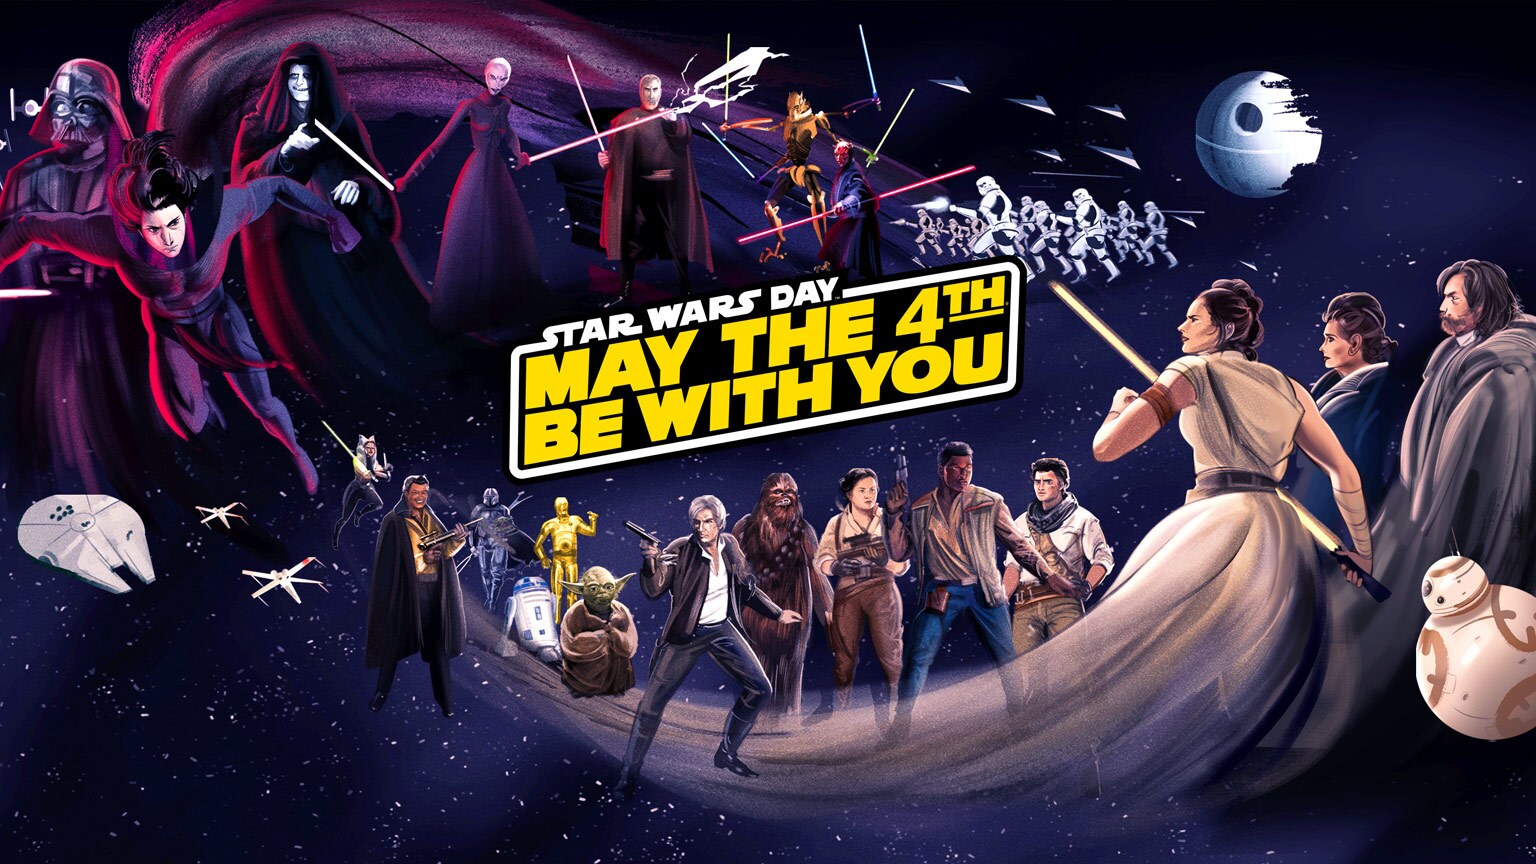 May the 4th be with you Star Wars